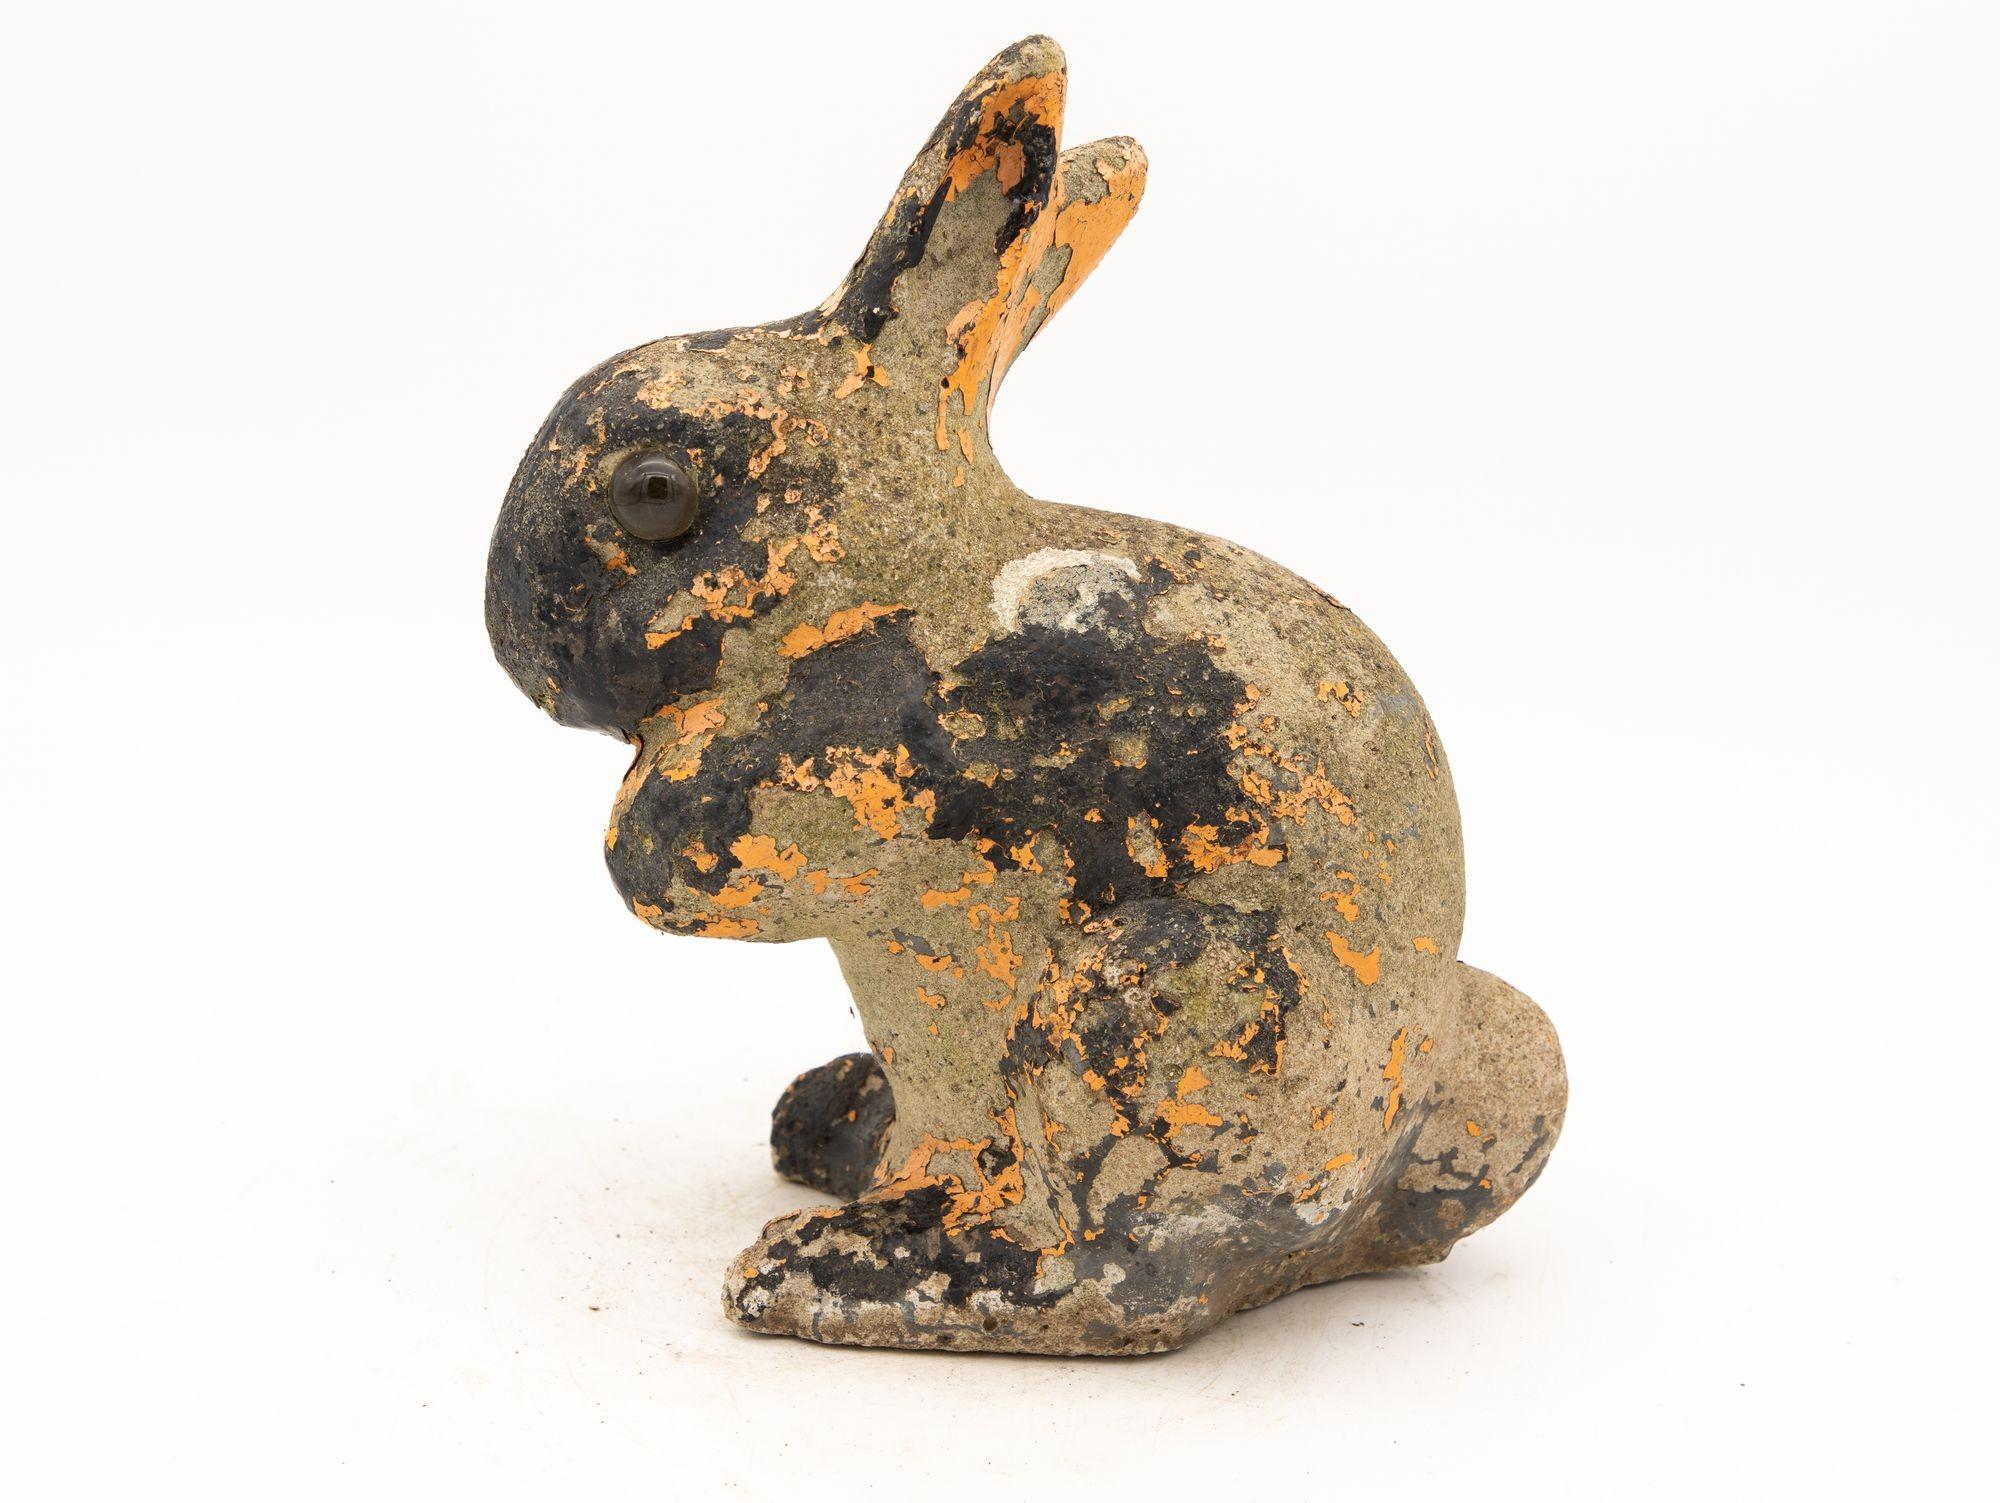 This charming garden ornament takes the shape of an adorable sitting bunny molded from durable concrete. With a touch of whimsy and a hint of nostalgia, this bunny carries a sense of character and history. The weathered exterior reveals hints of its